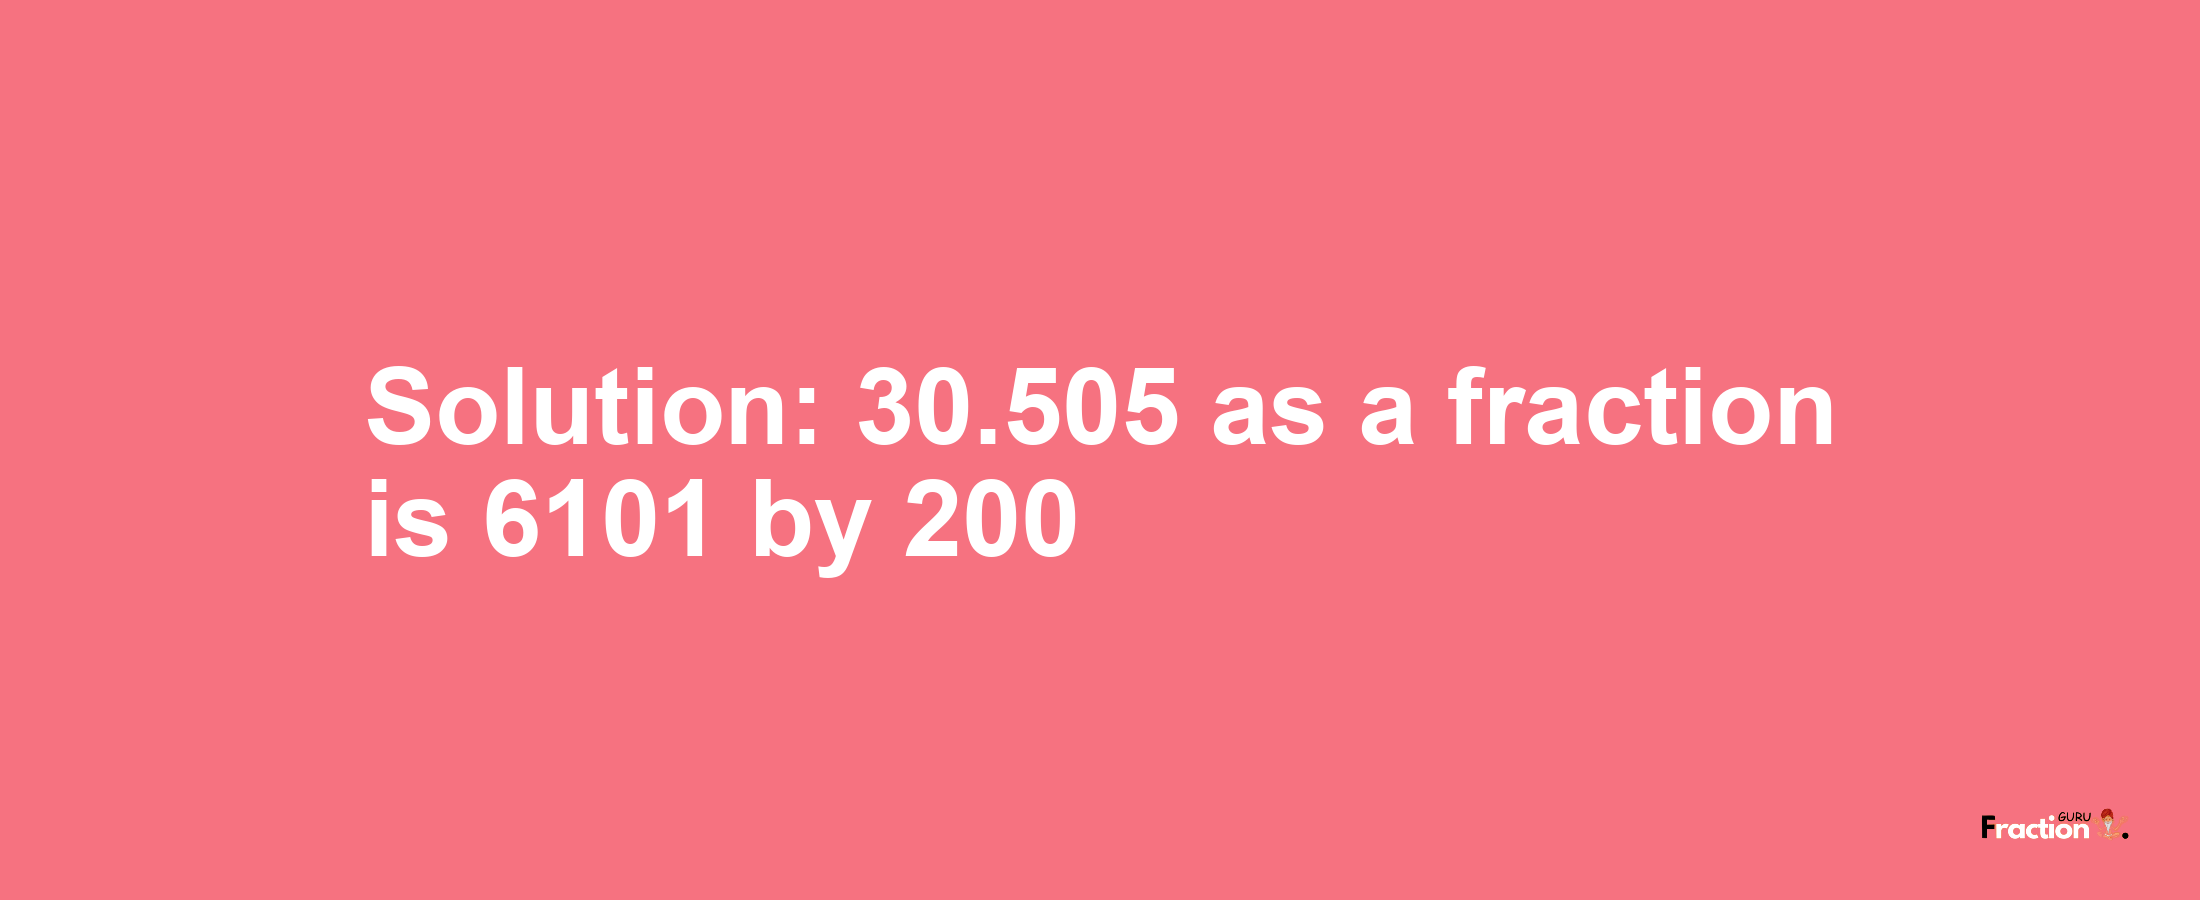 Solution:30.505 as a fraction is 6101/200